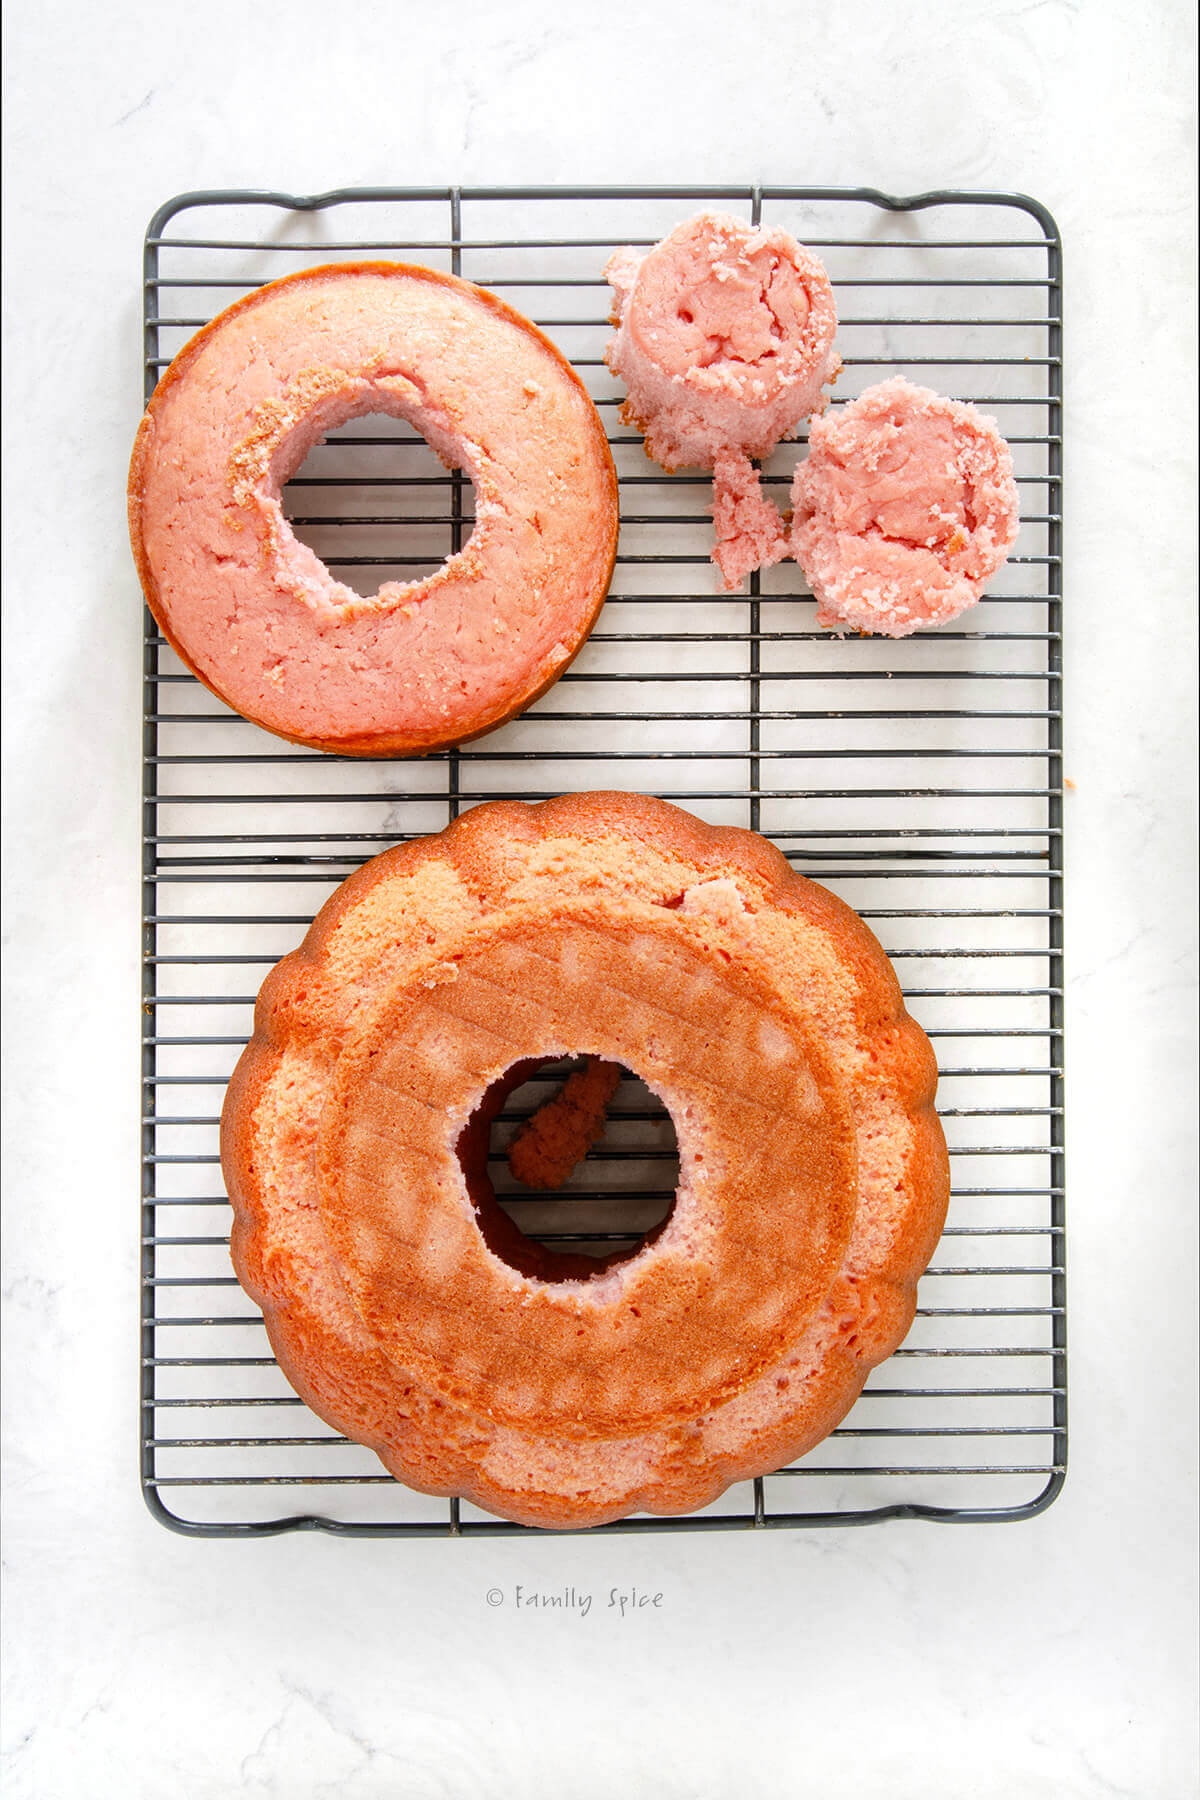 Top view of a pink strawberry bundt cake with a 6-inch strawberry cake with center cut out on top of it and another 6-inch inch cake with center cut out next to it on a cooling rack